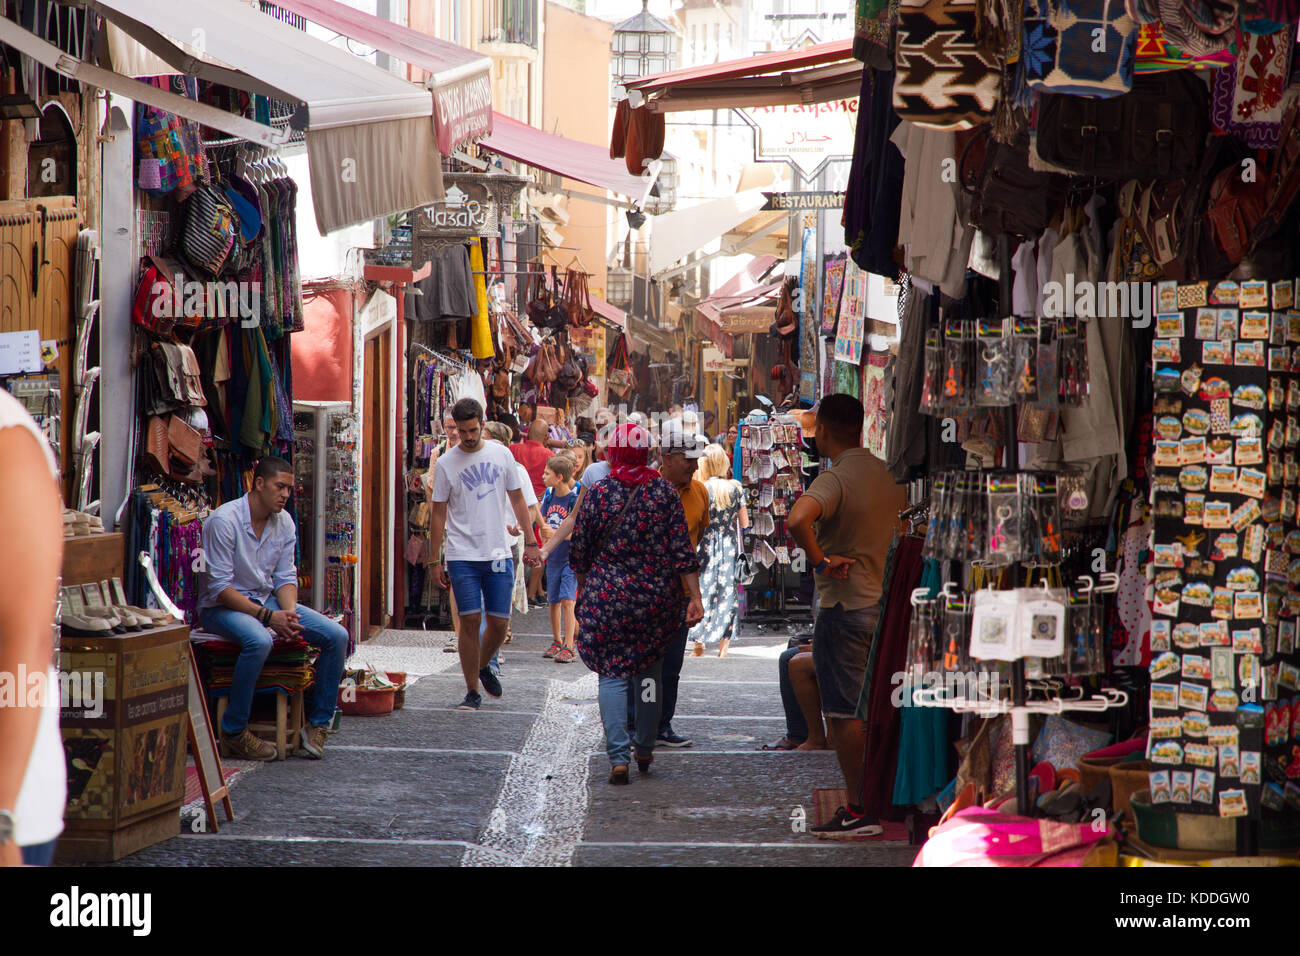 tourists exploring alley ways selling goods and souvenirs, Granada Spain Stock Photo